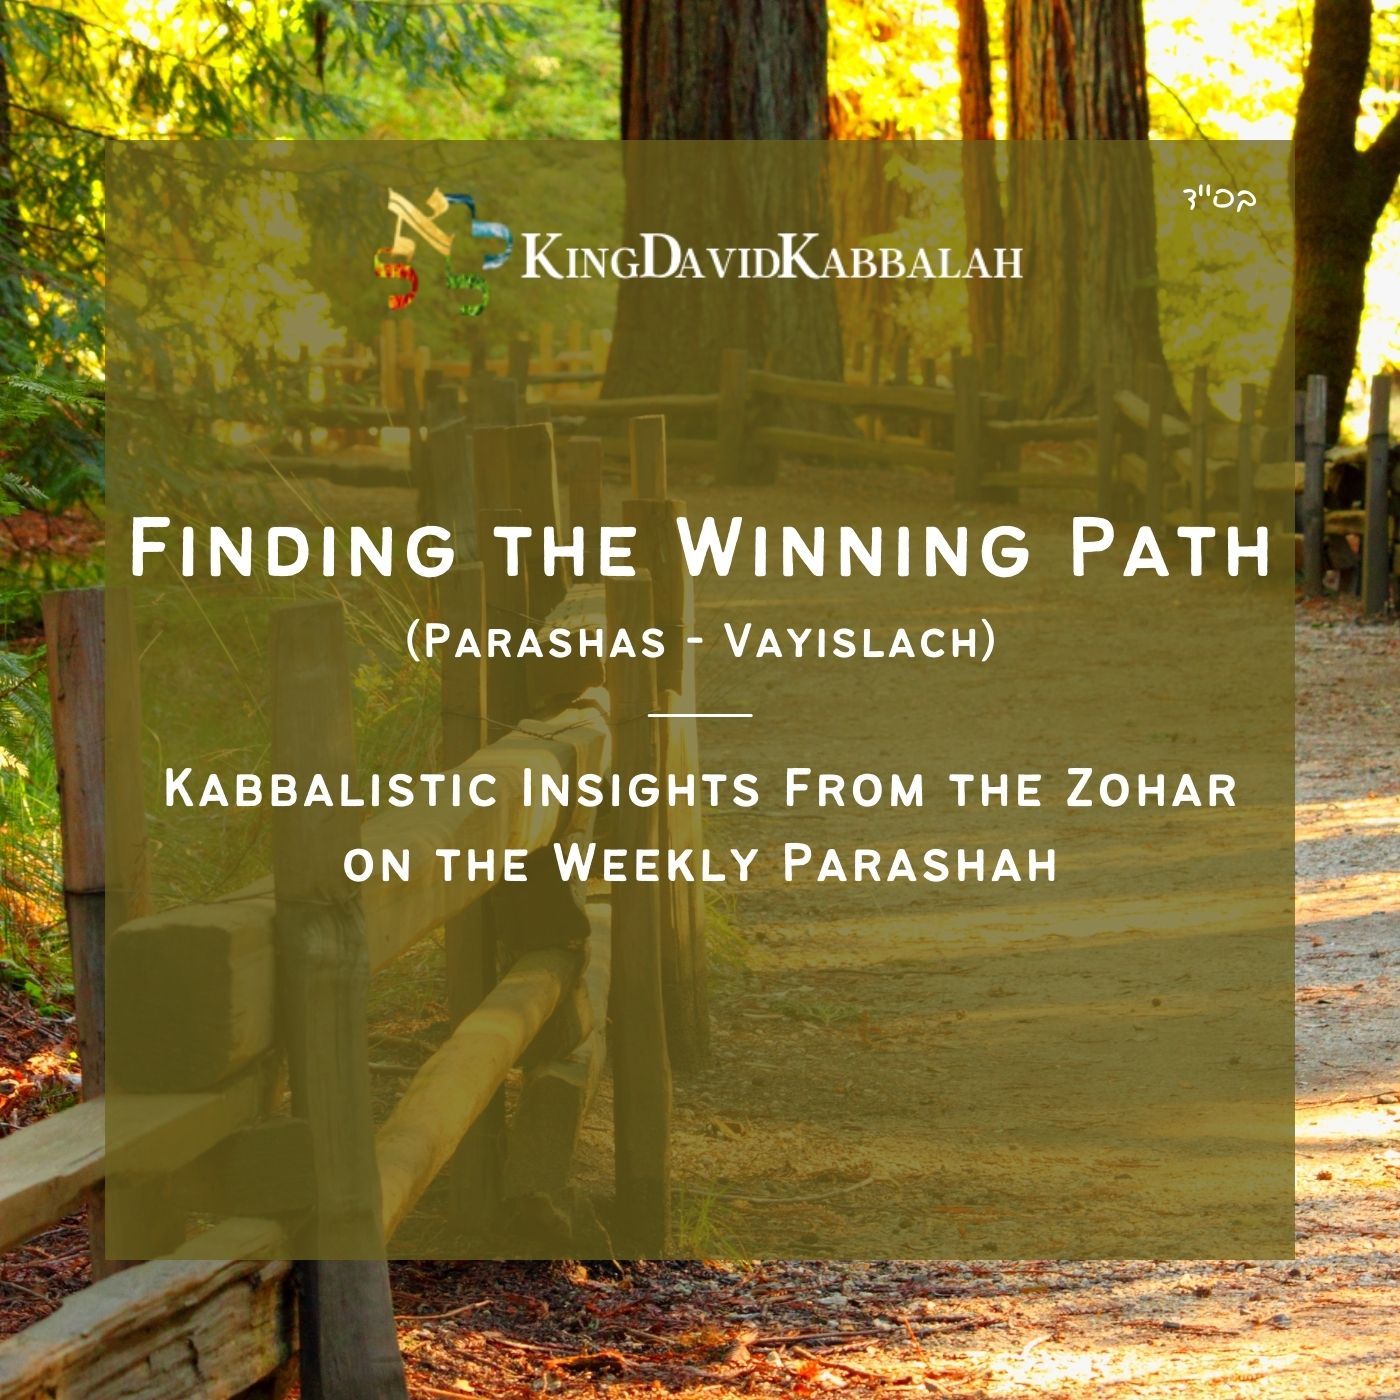 Kabbalistic Inspiration on the Parasha from the Zohar - Finding the Winning Path